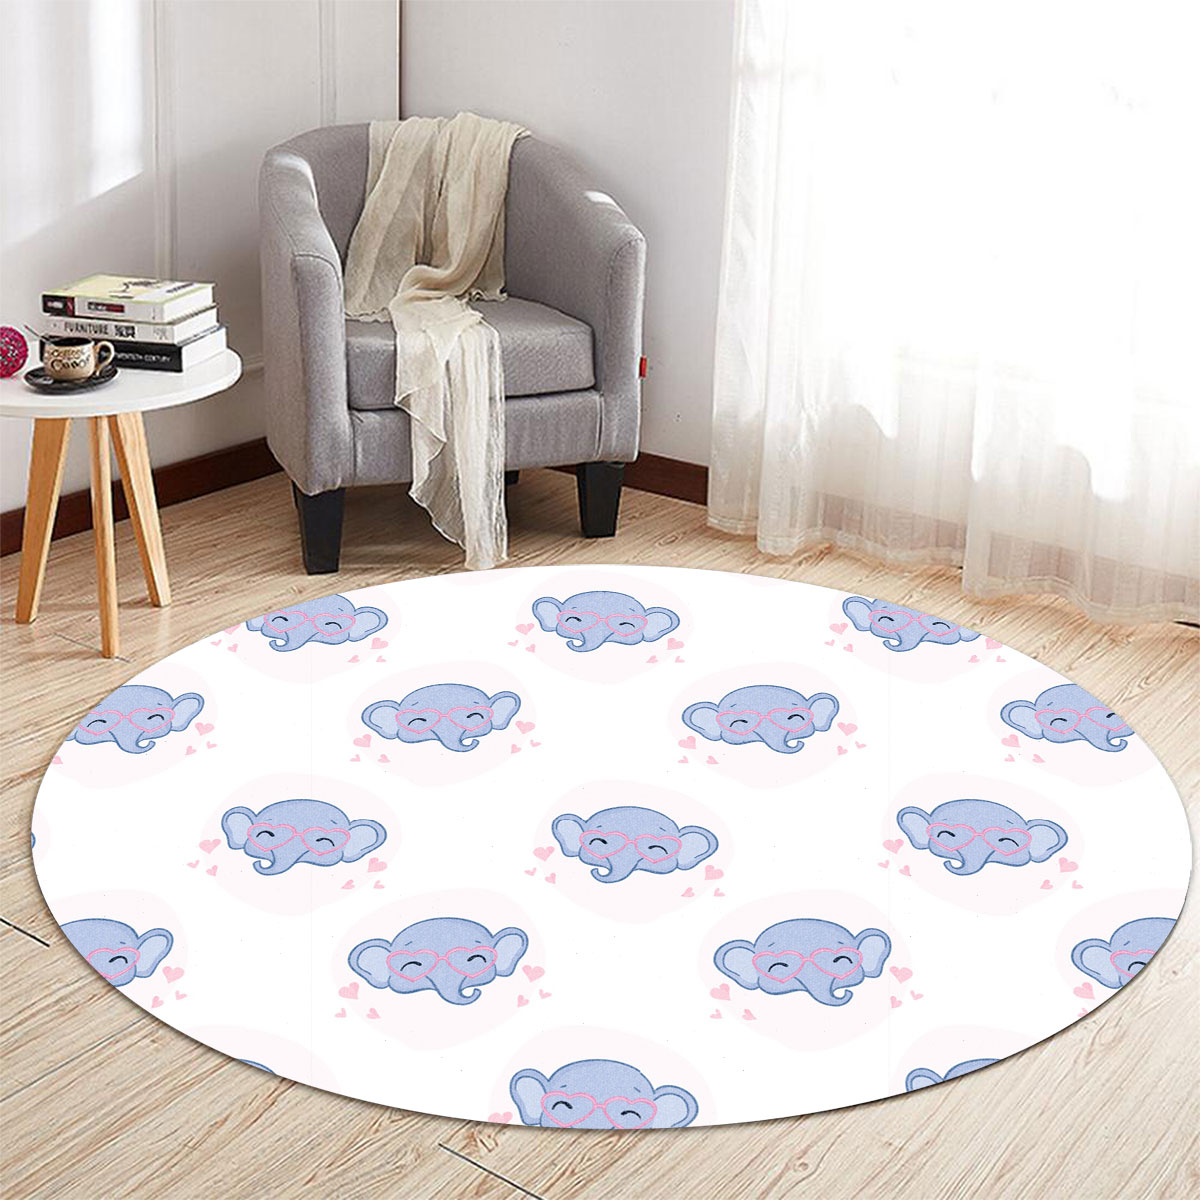 Lovely African Elephant Round Carpet 6